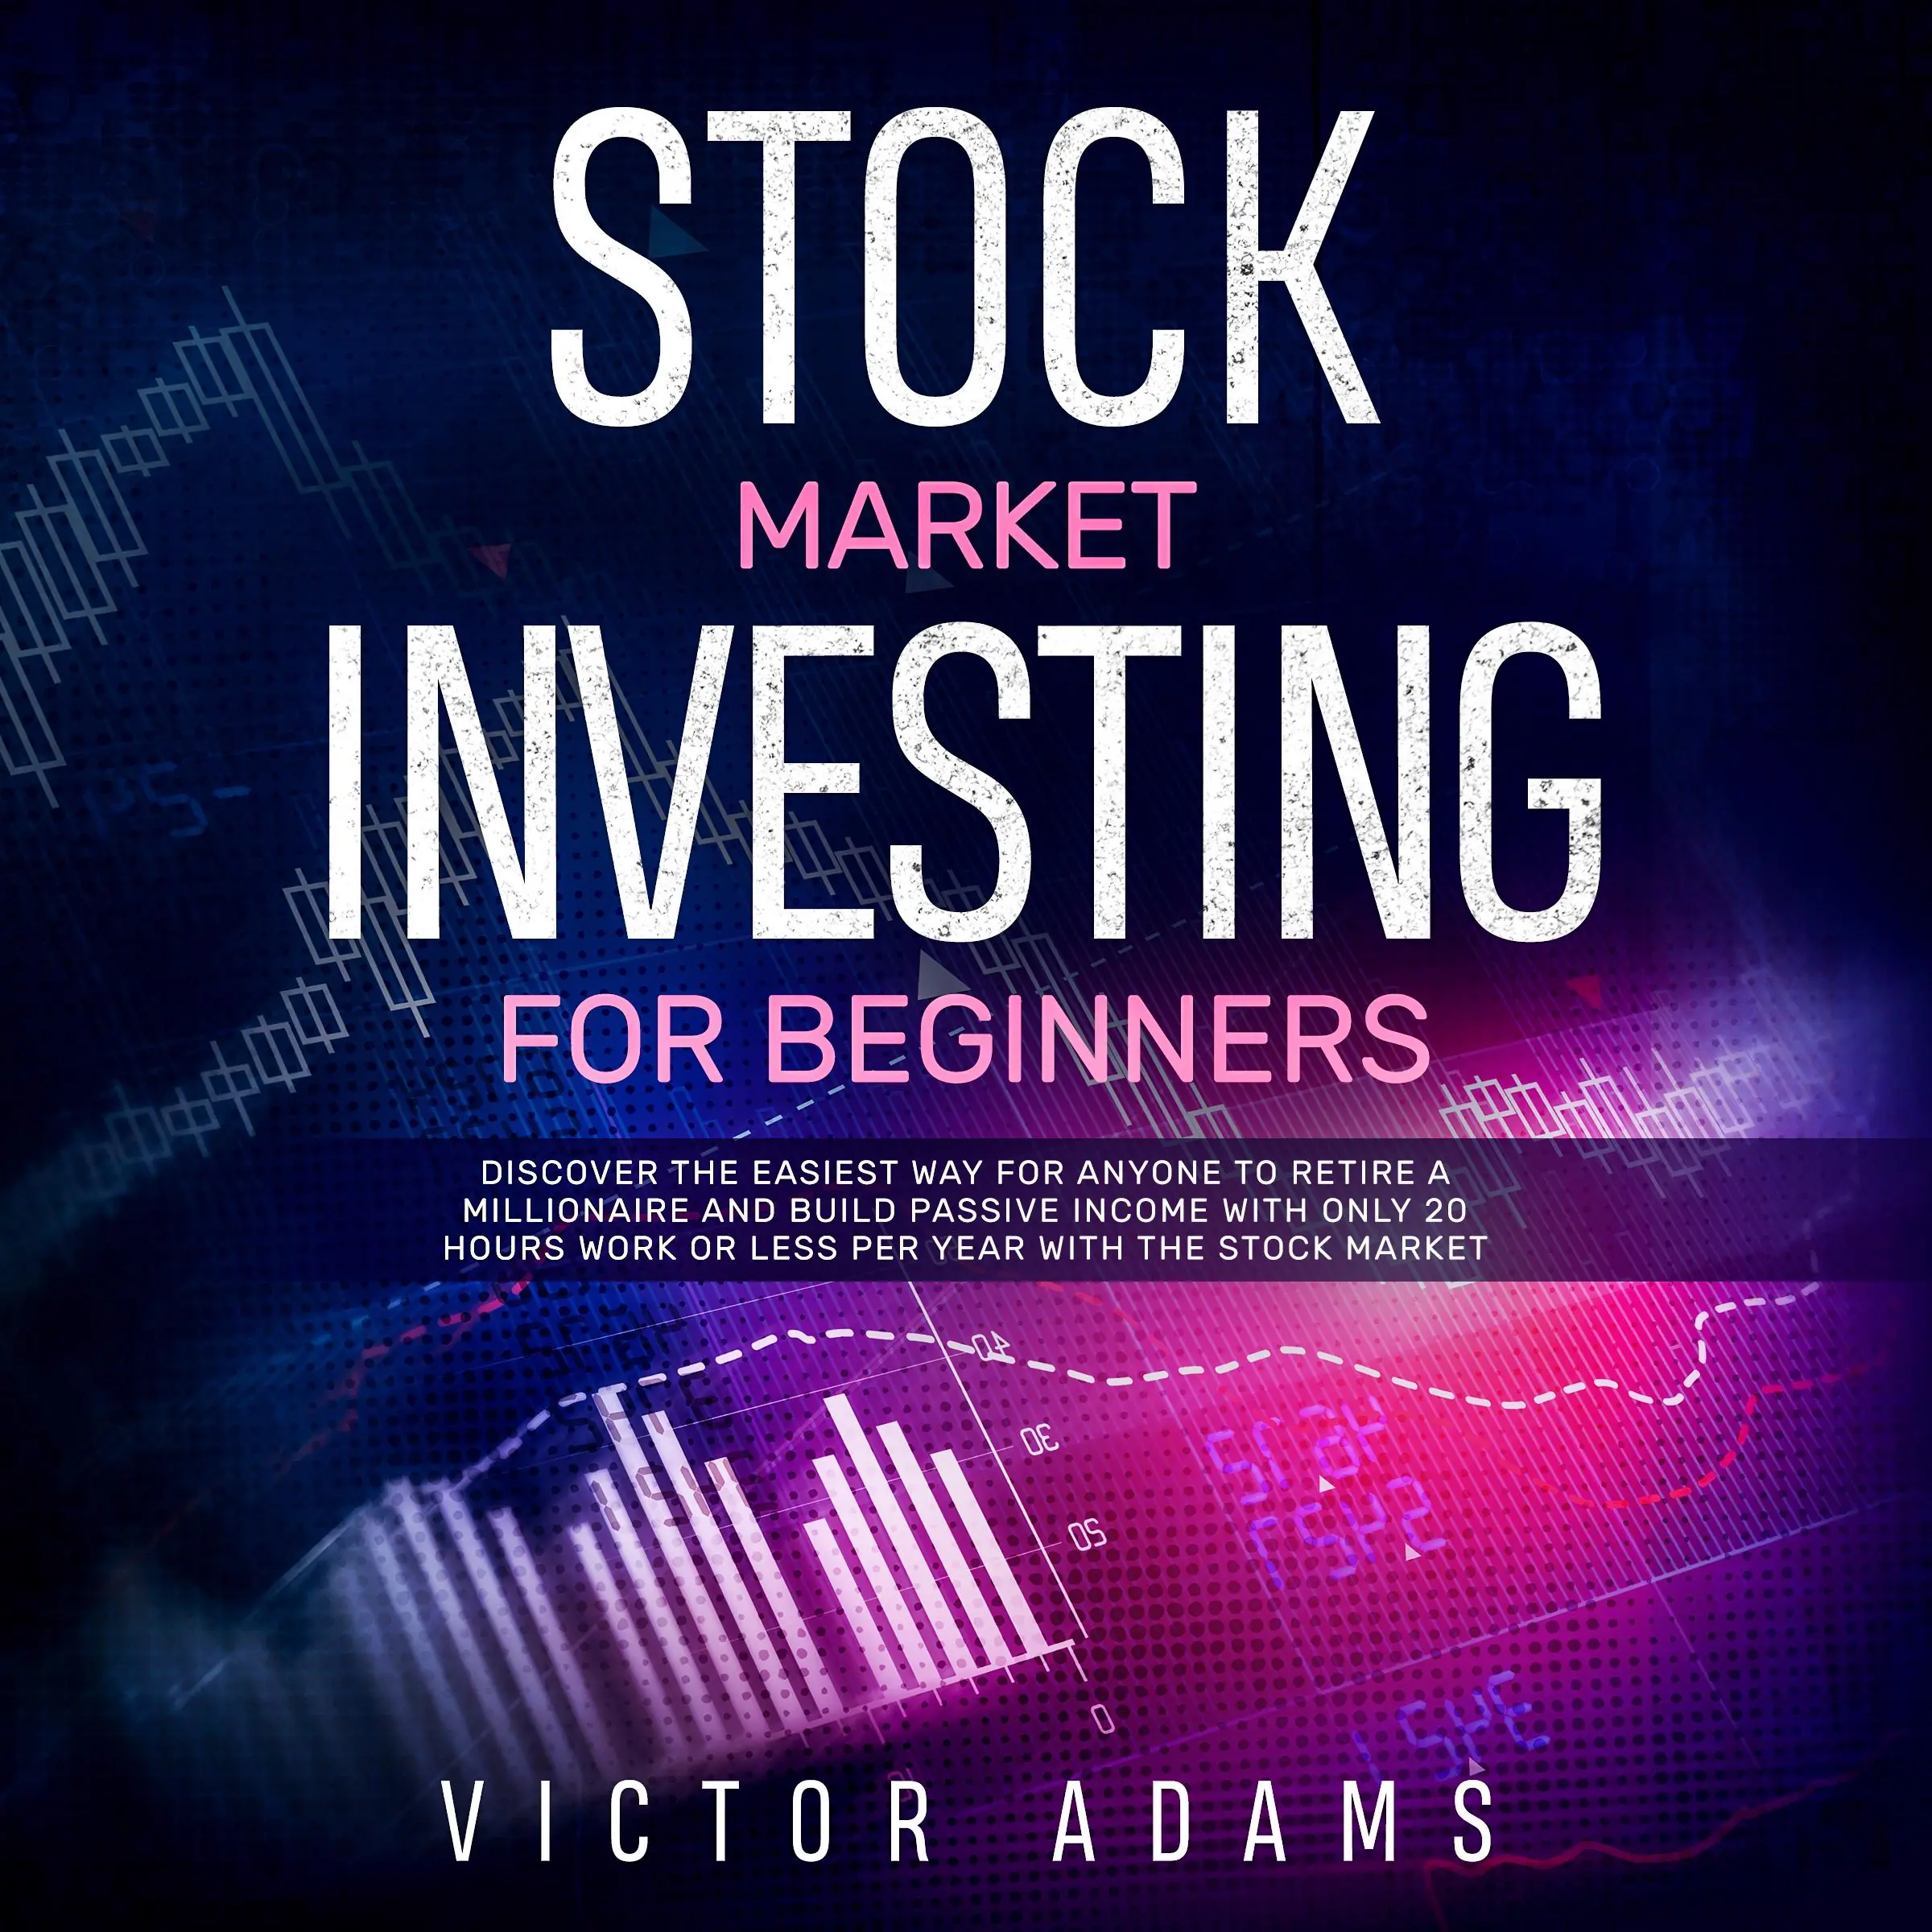 Stock Market Investing for Beginners: Discover The Easiest way For Anyone to Retire a Millionaire and Build Passive Income with Only 20 Hours Work or less per year Through The Stock Market by Victor Adams Audiobook